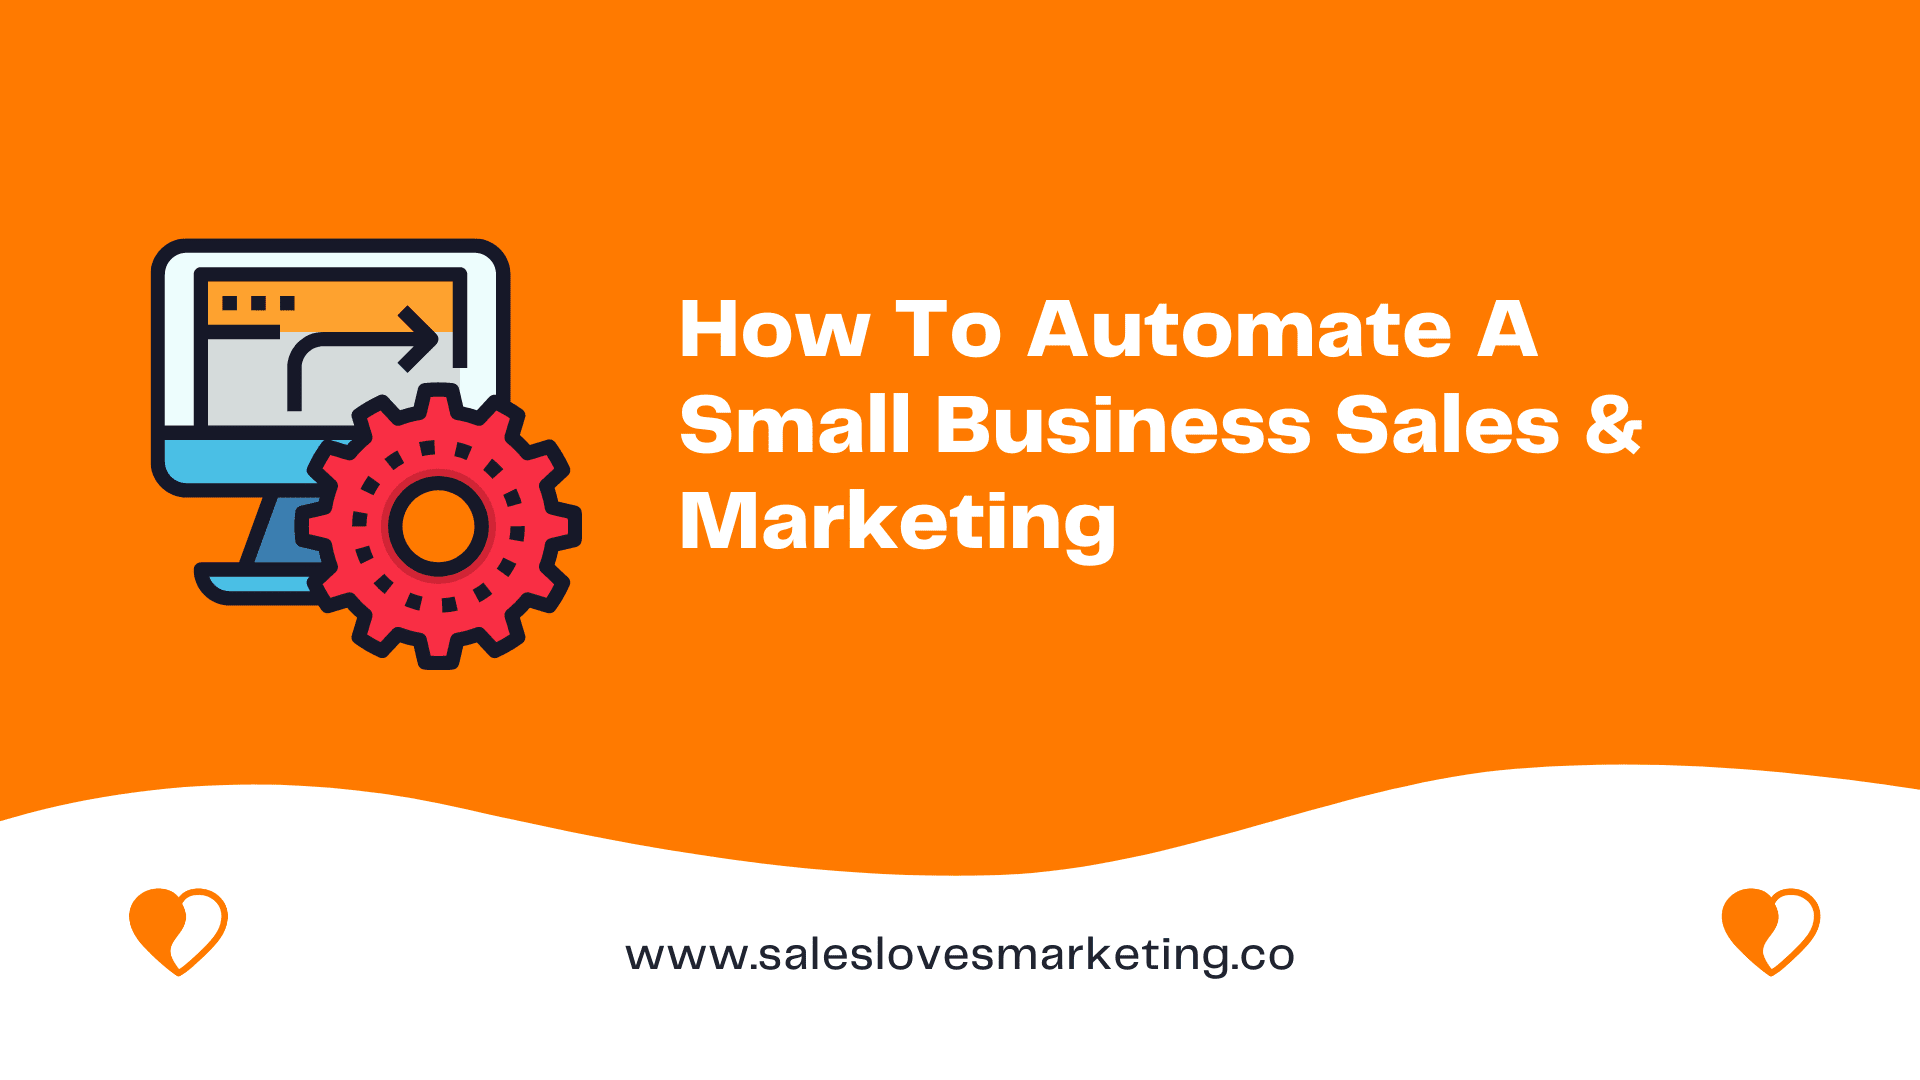 How To Go About Automating A Small Business Sales & Marketing